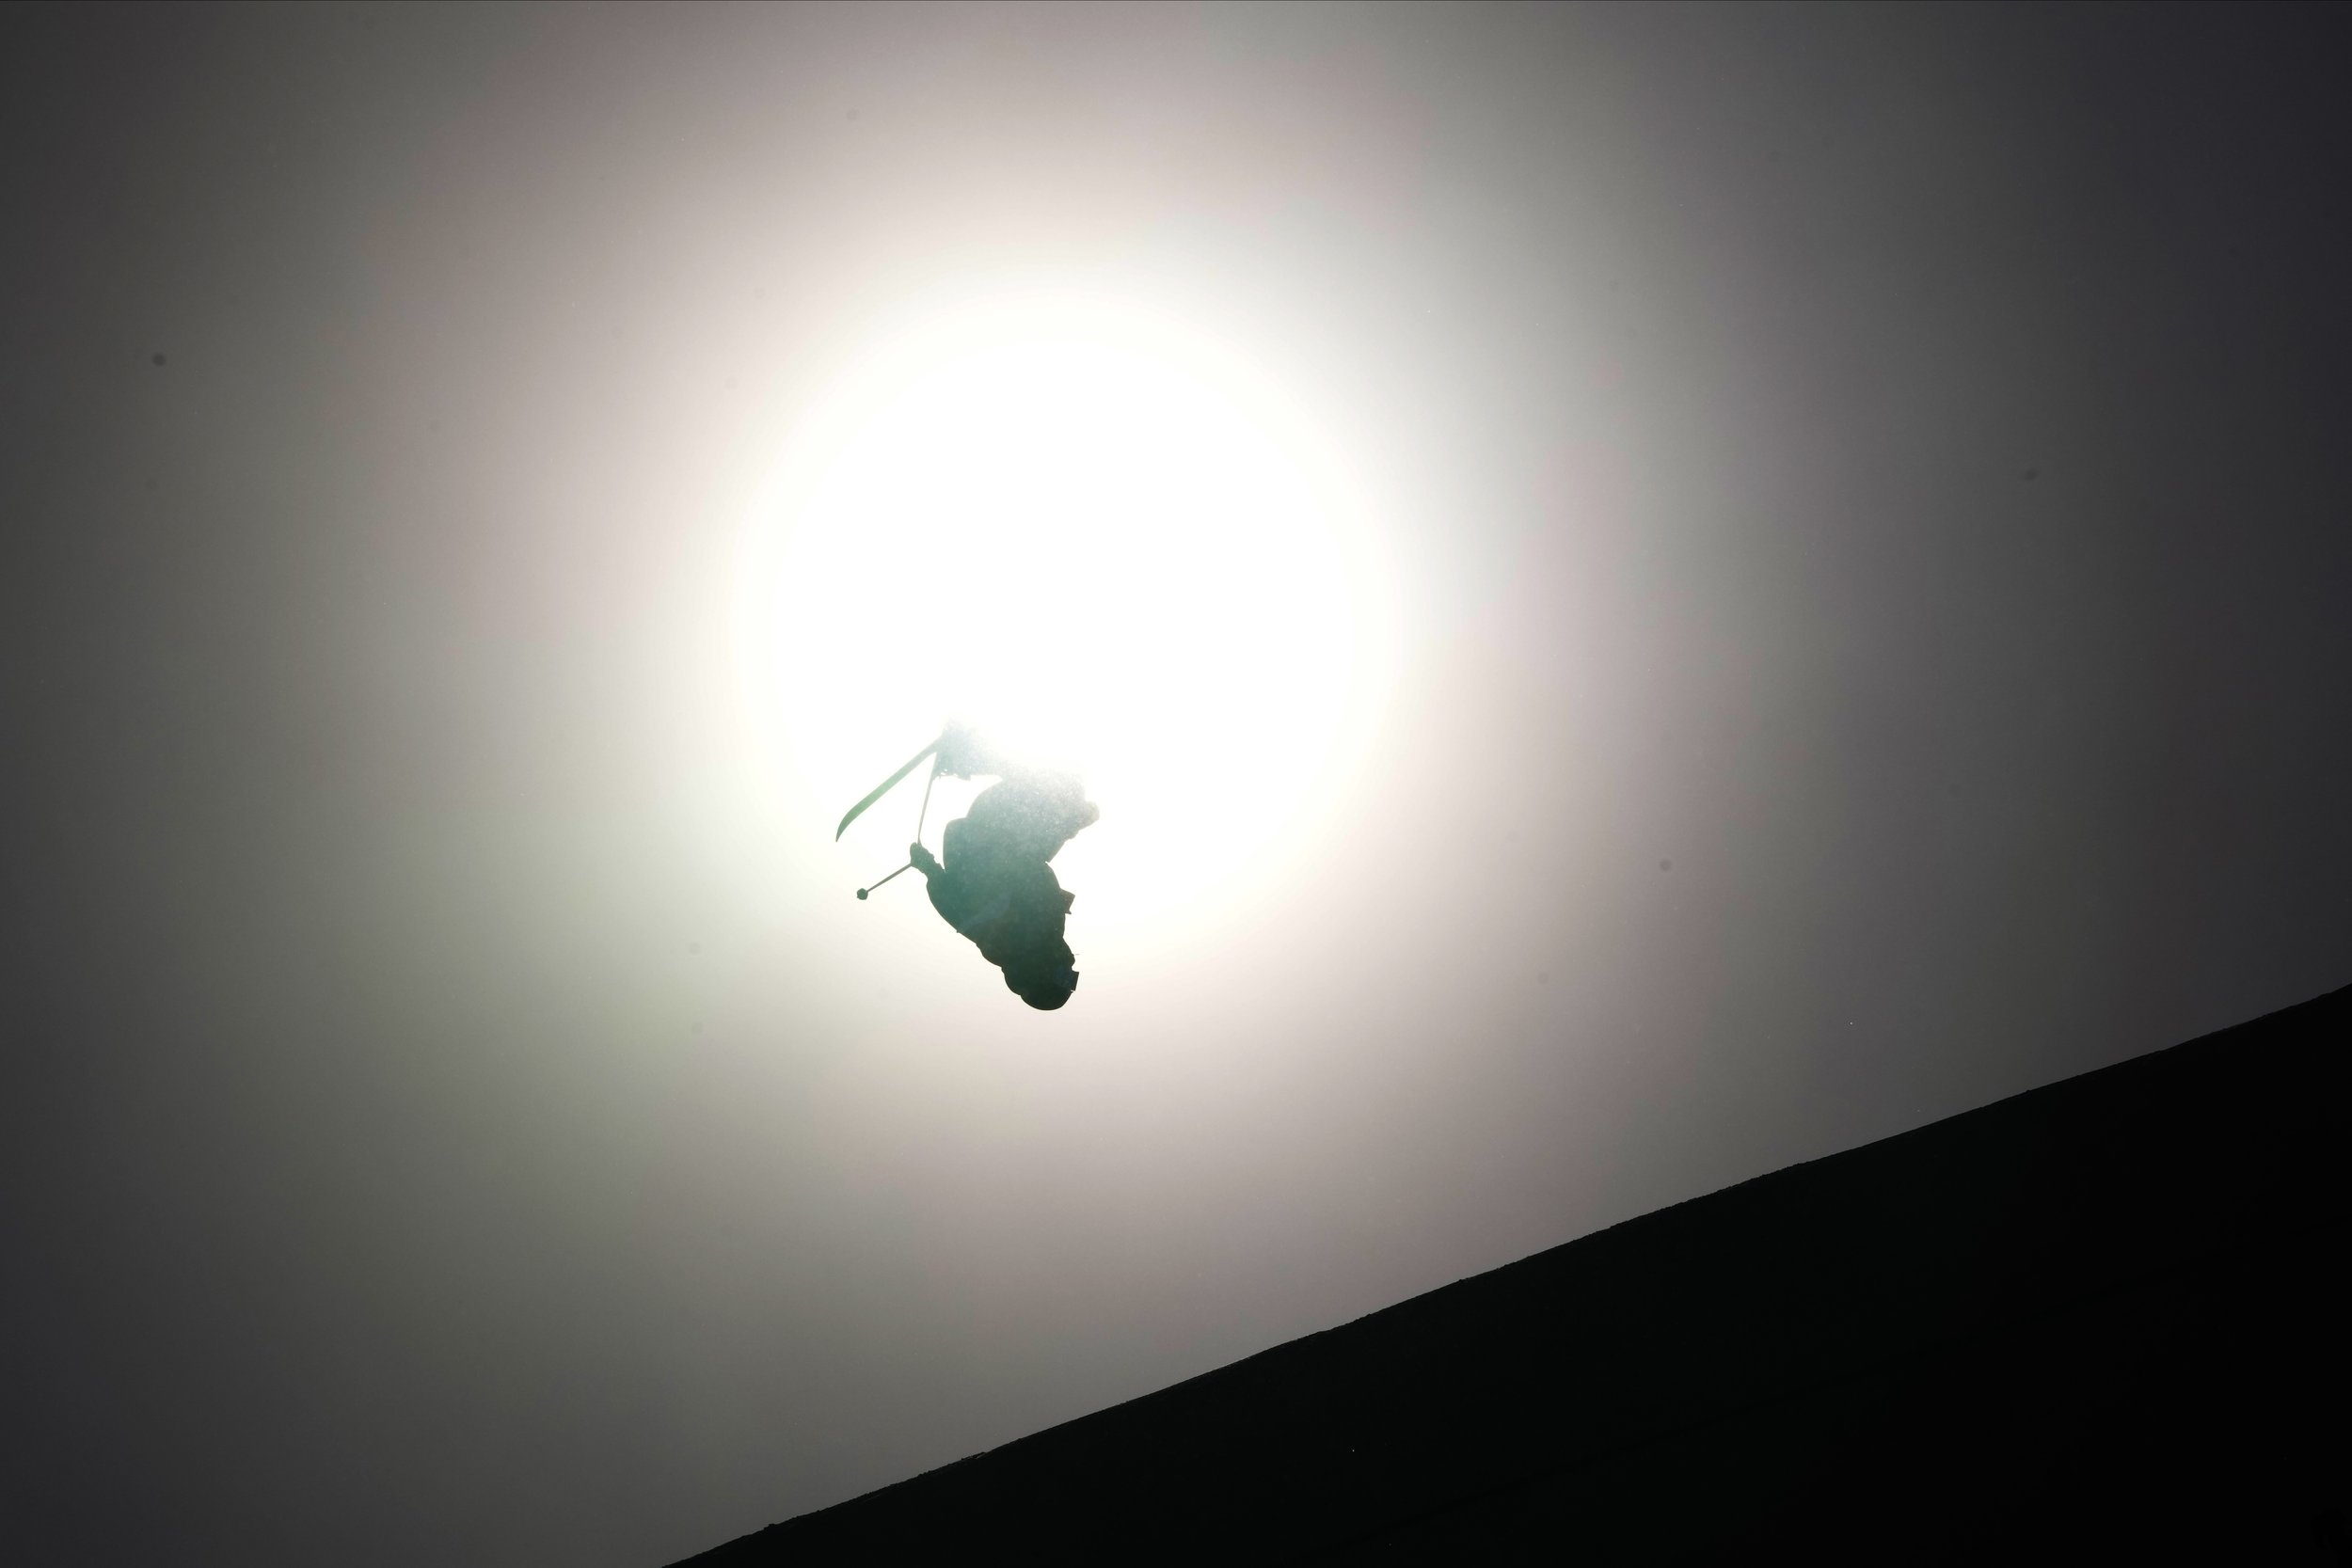  Switzerland's Andri Ragettli is silhouetted in front of the sun as he competes during the men's slopestyle qualification at the 2022 Winter Olympics, Tuesday, Feb. 15, 2022, in Zhangjiakou, China. (AP Photo/Francisco Seco) 